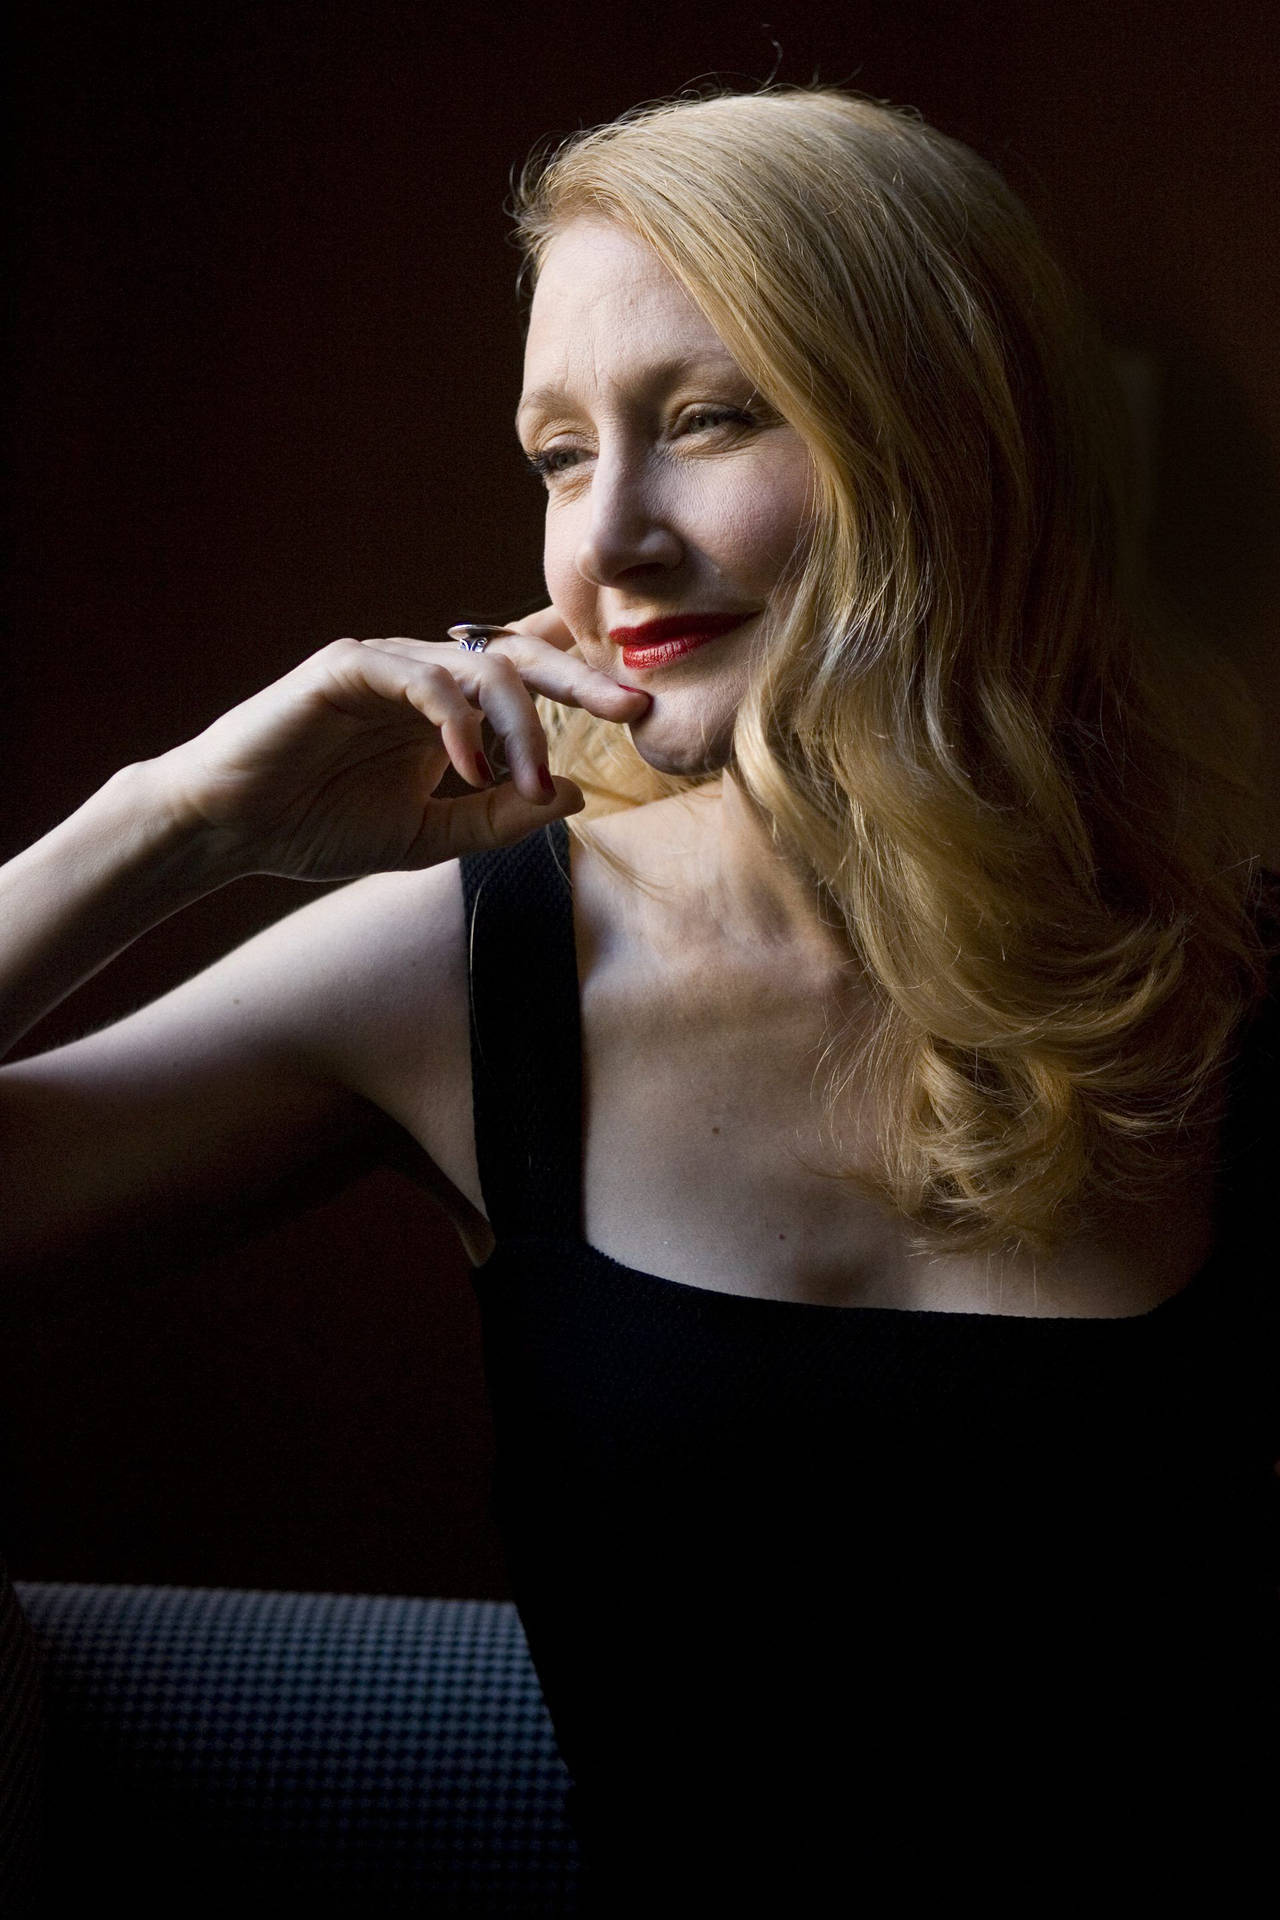 Patricia Clarkson In "The Green Mile" Wallpaper